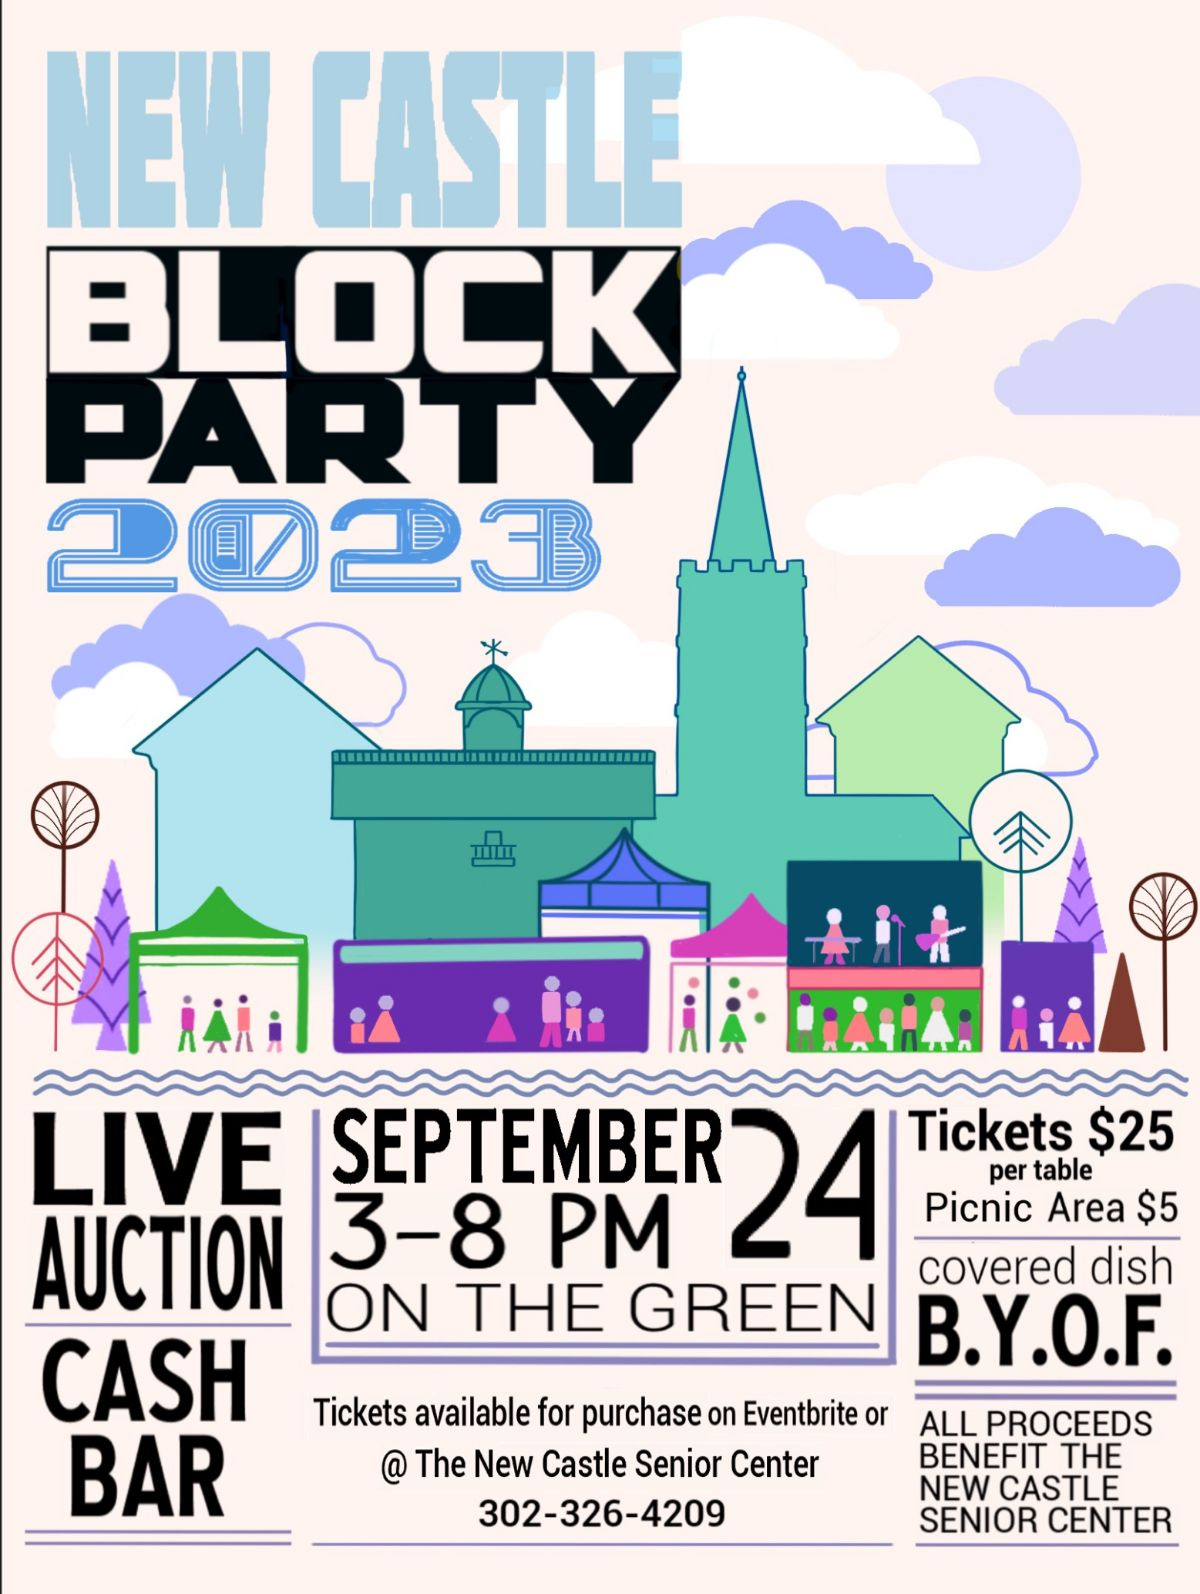 May be an image of text that says 'NEW CASTLE BLOCK PARTY 2023 Aw ÛAHAA LIVE SEPTEMBER 24 Tickets $25 per table AUCTION 3-8 PM Picnic Area $5 covered dish ON THE GREEN CASH B.Y.O.F. Tickets available for purchase on Eventbrite or BAR @ The New Castle Senior Center 302-326-4209 ALL PROCEEDS BENEFIT THE NEW CASTLE SENIOR CENTER'